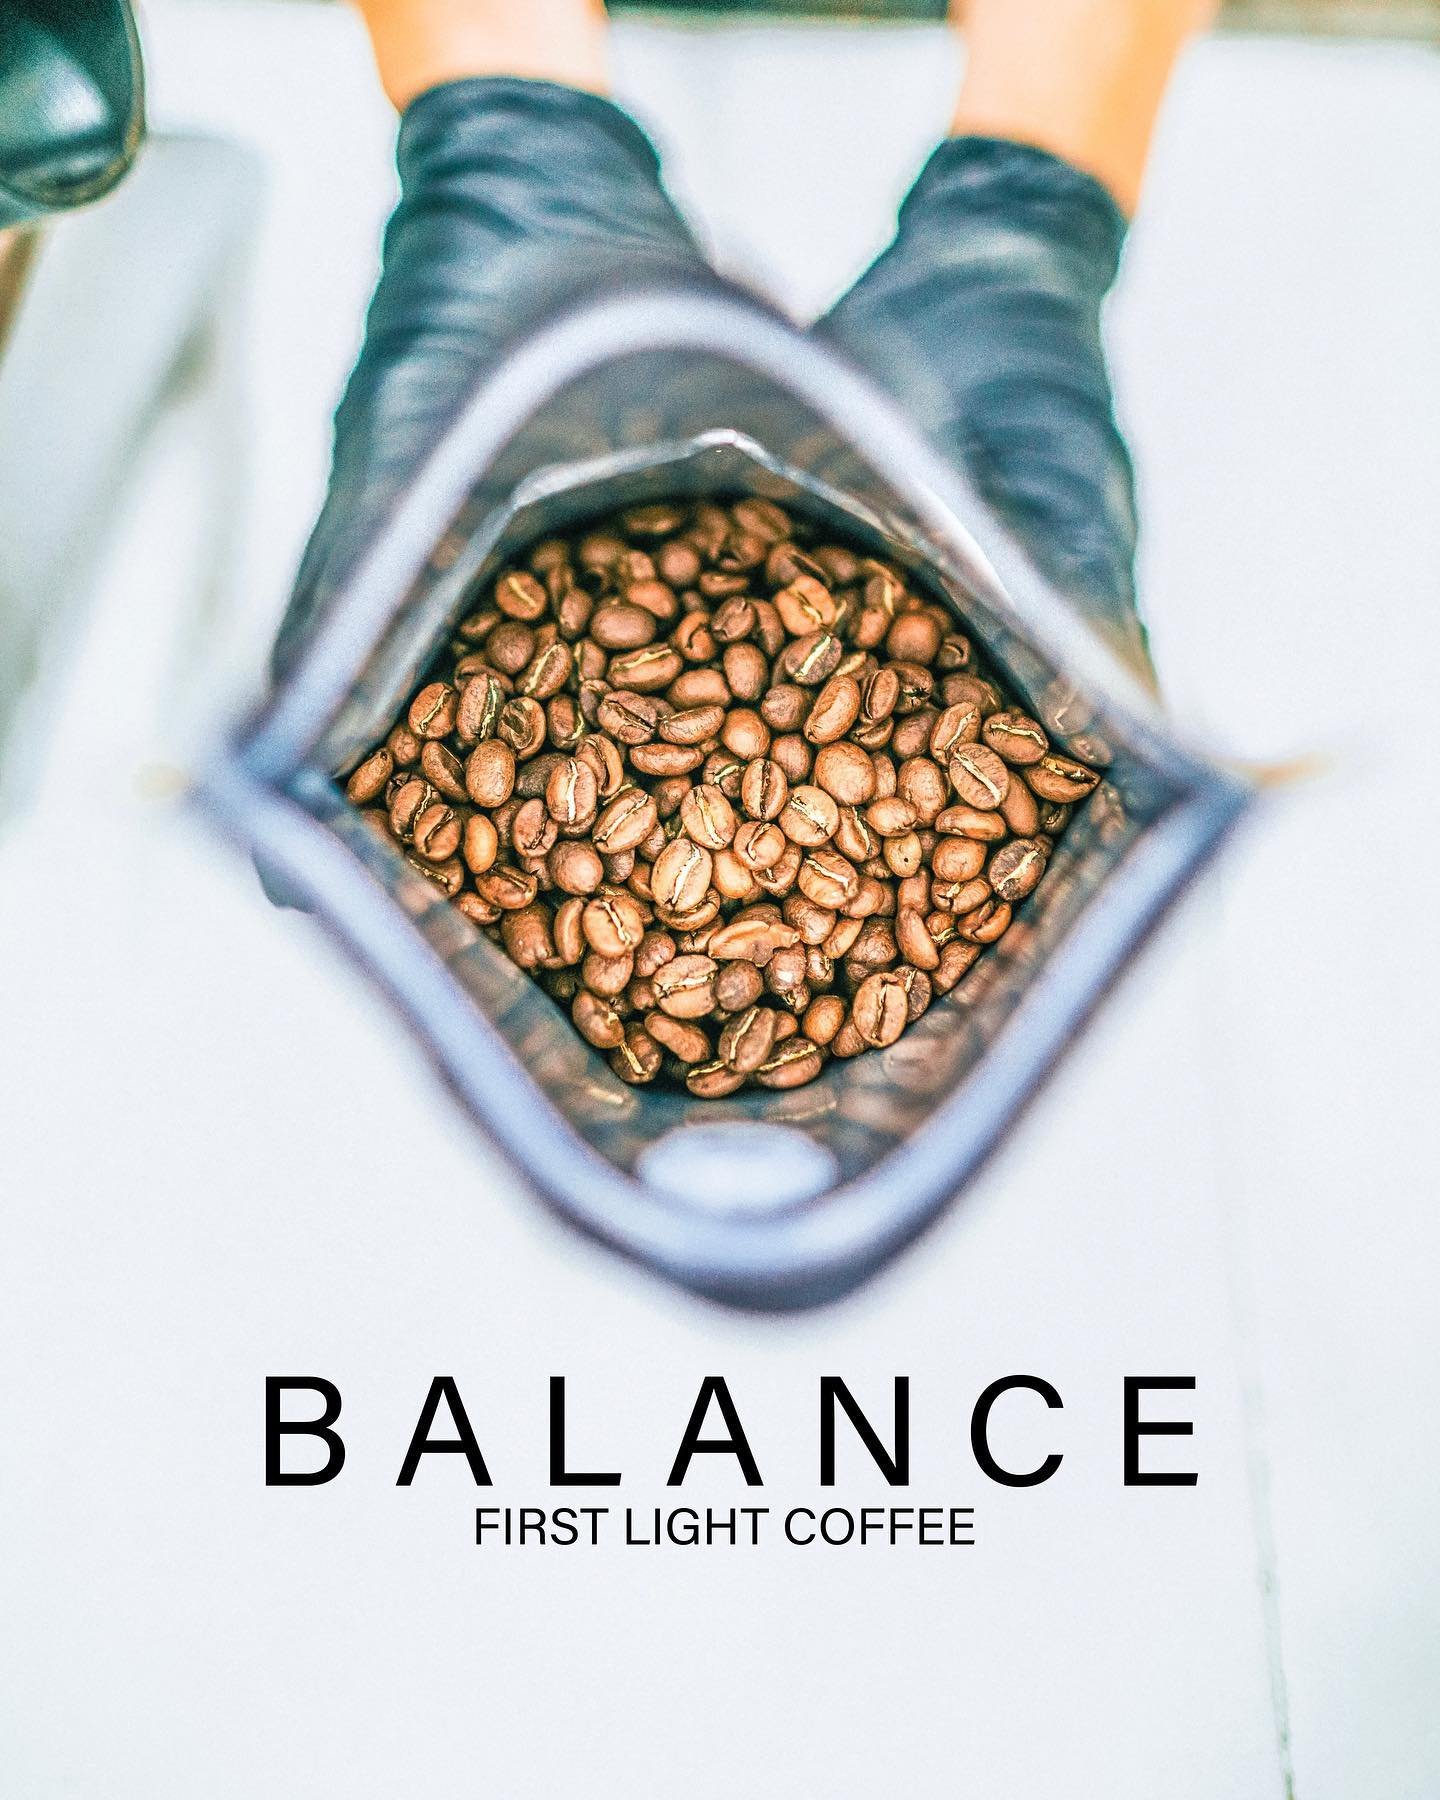 &quot;Wonderfully nutty with the perfect balance of sweetness and citrus.&quot;

We love this review of our COPA coffee from a recent customer. It's also packed full of antioxidants which makes it clean and healthy as well as damn tasty. 

www.firstl